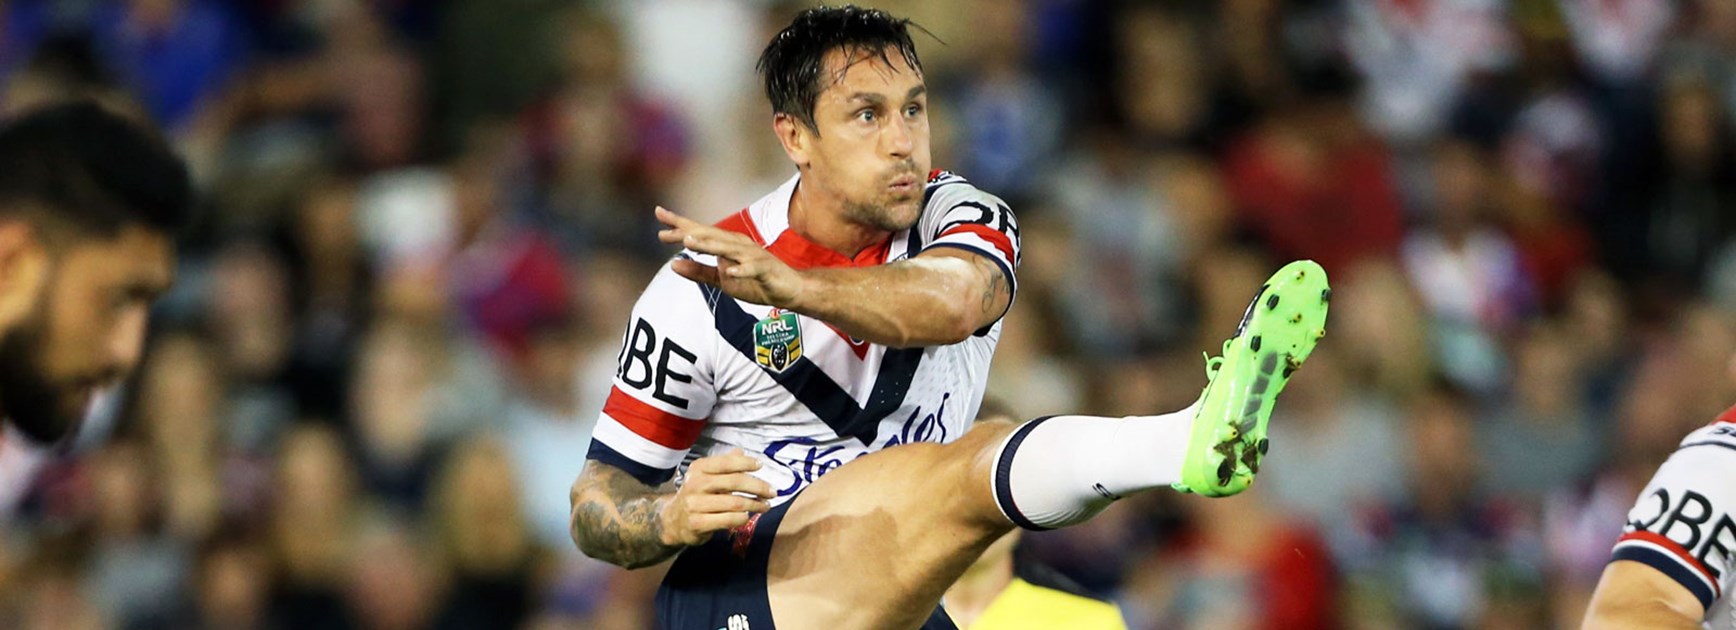 Roosters halfback Mitchell Pearce against the Knights.